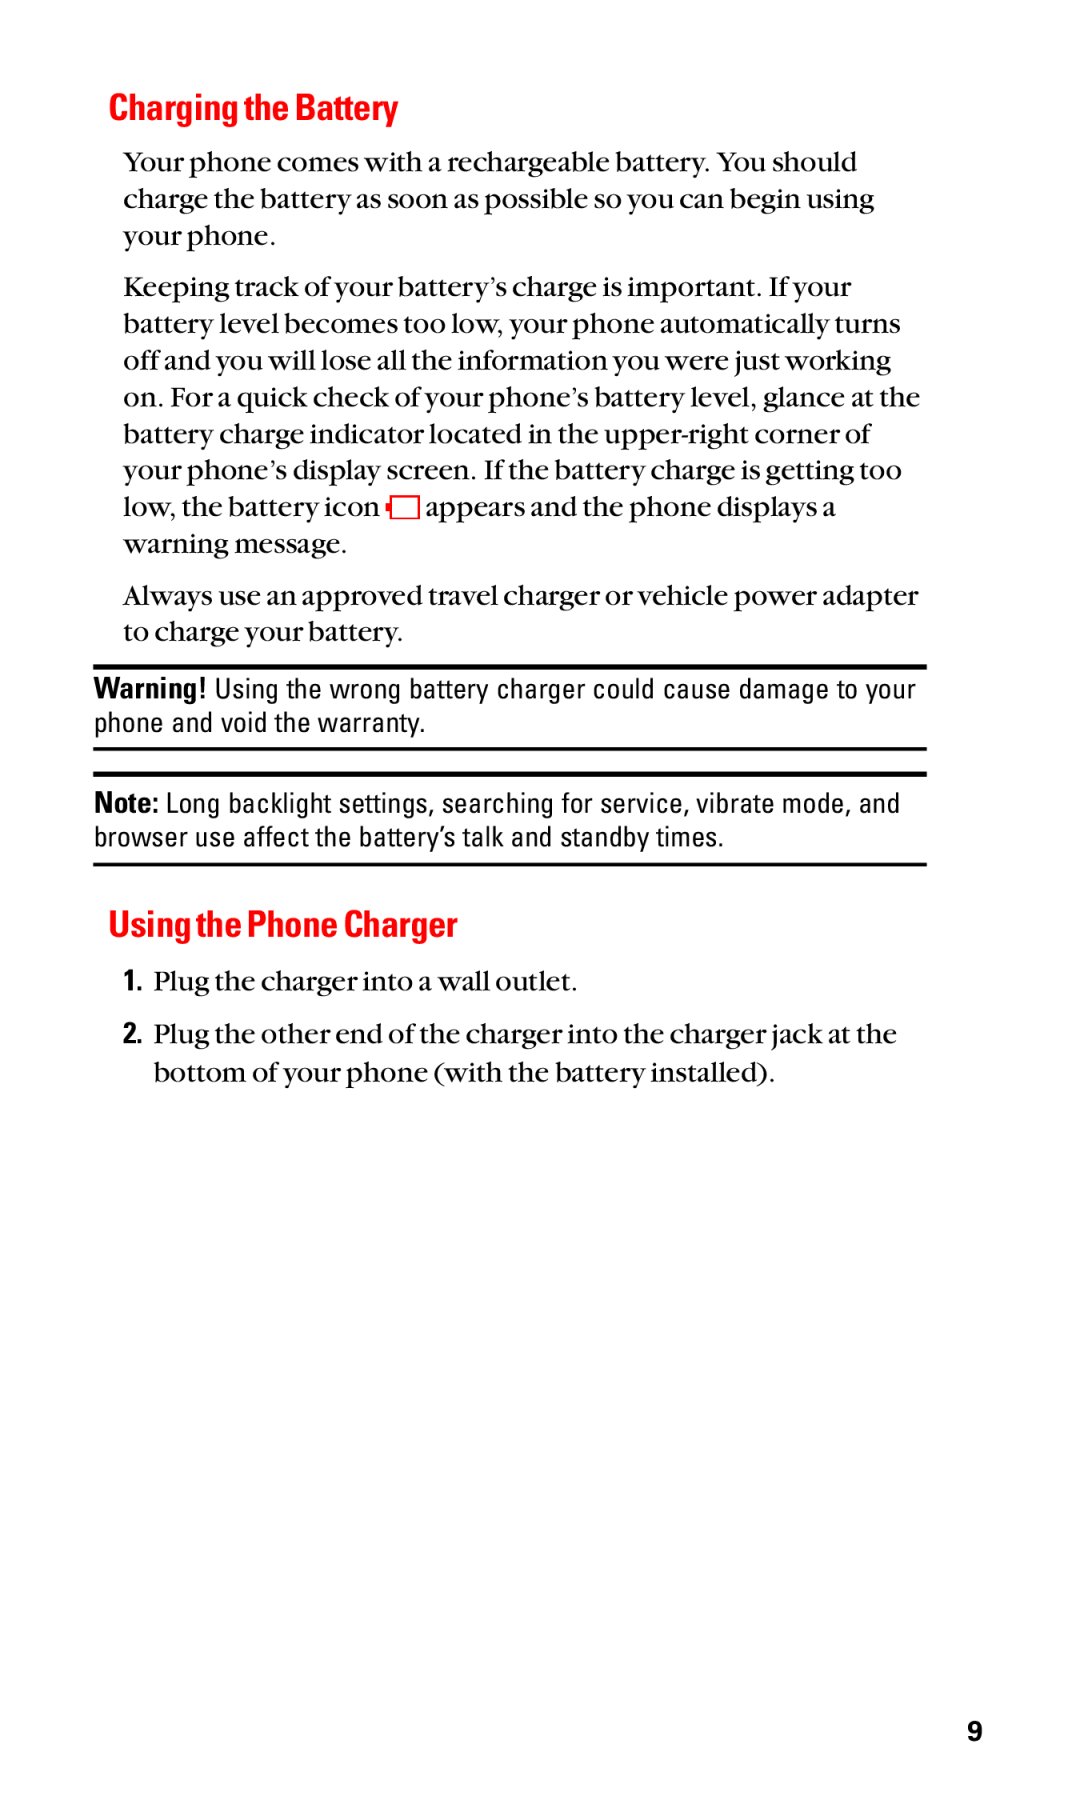 Sanyo SCP-7050 manual Charging the Battery, Using the Phone Charger 